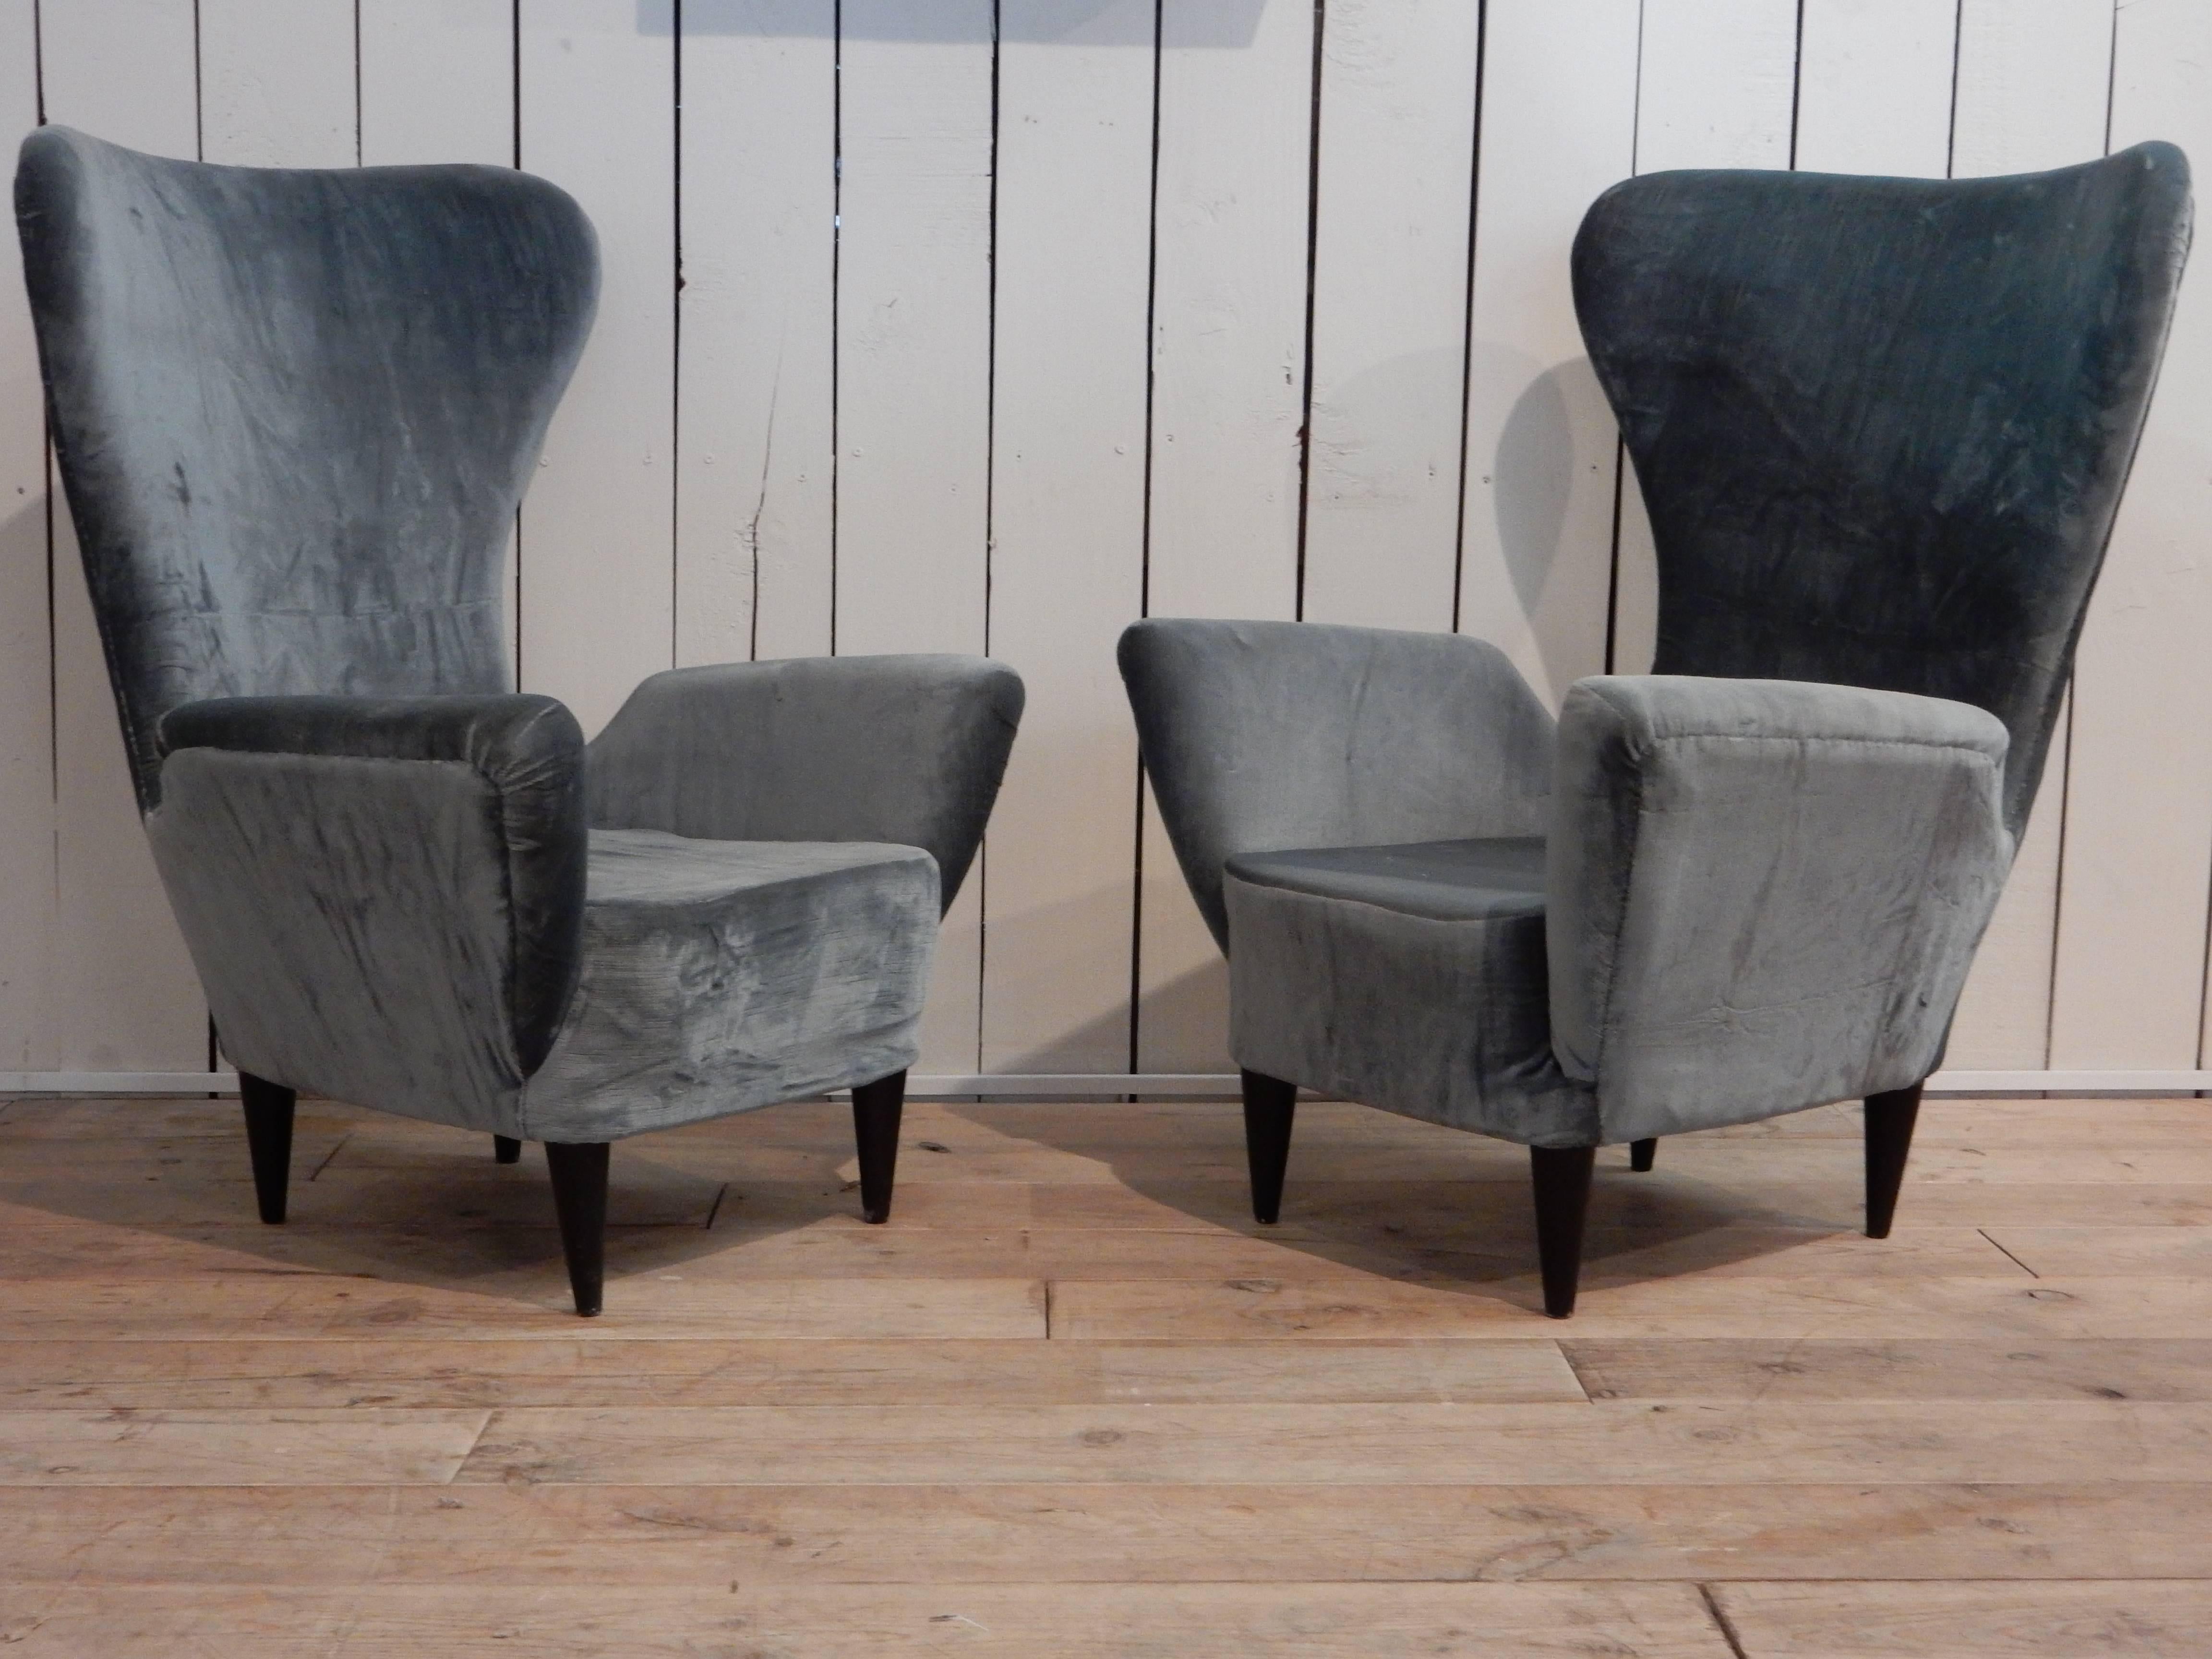 A beautiful pair of armchair in the style of Paolo Buffa in good original condition.